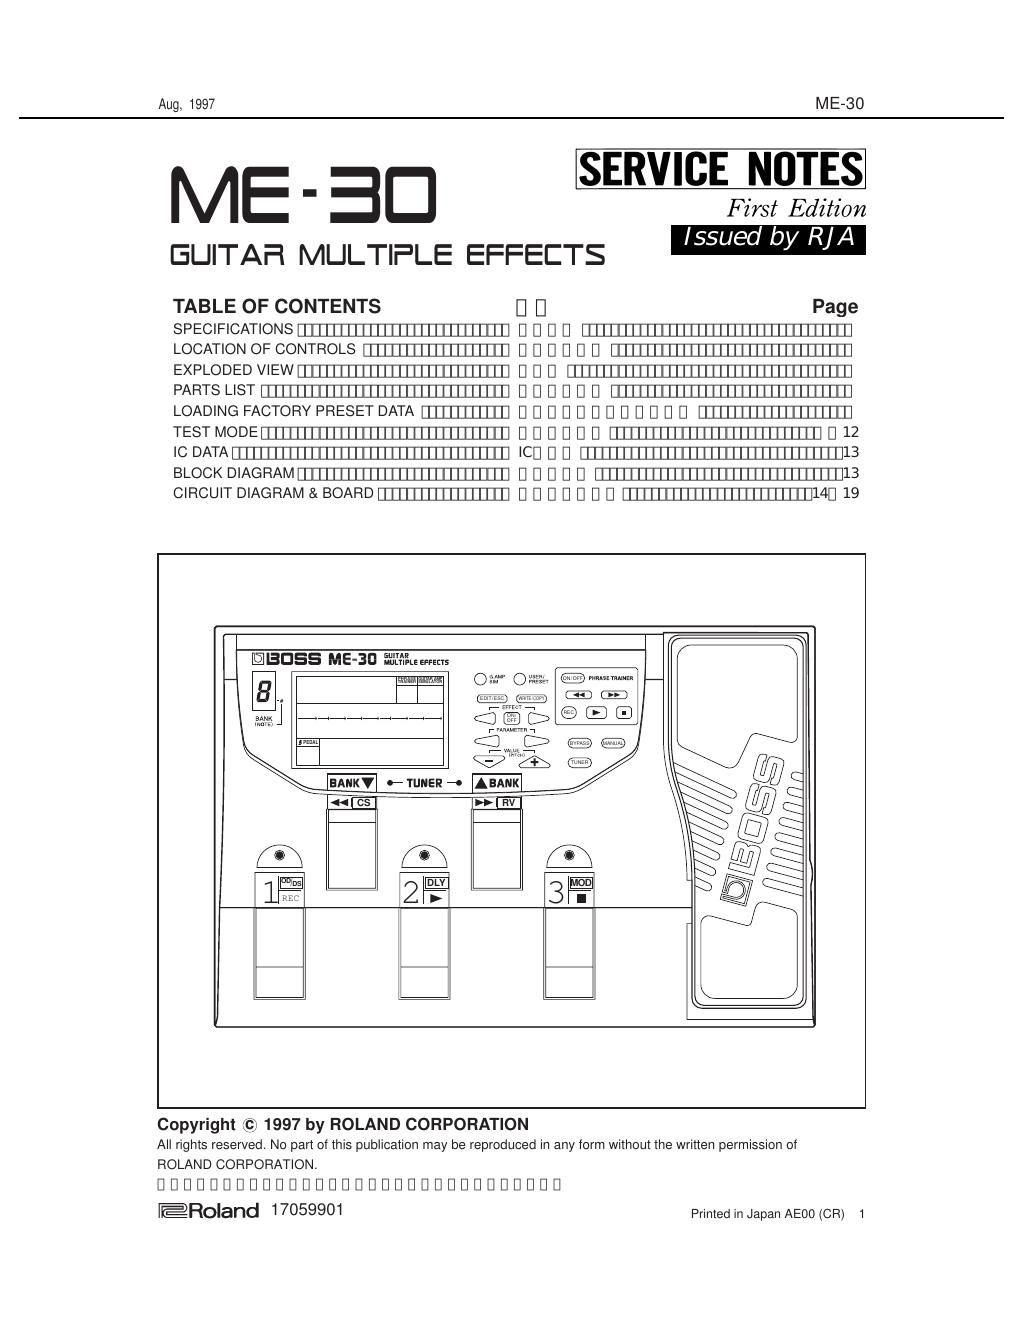 BOSS ME 30 SERVICE NOTES